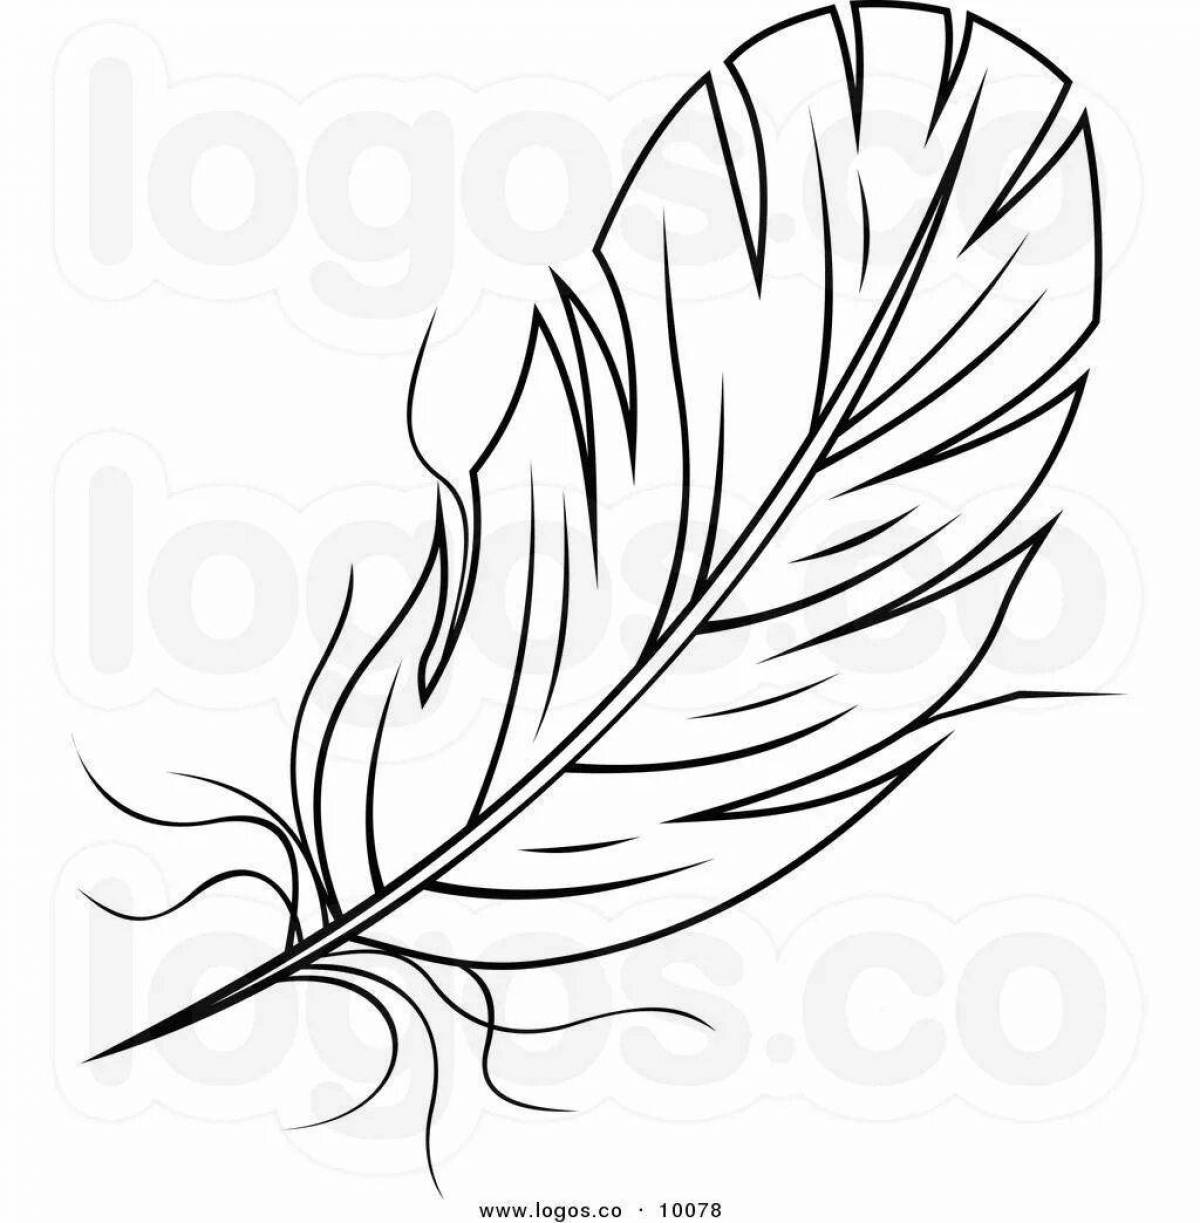 Feather for kids #4